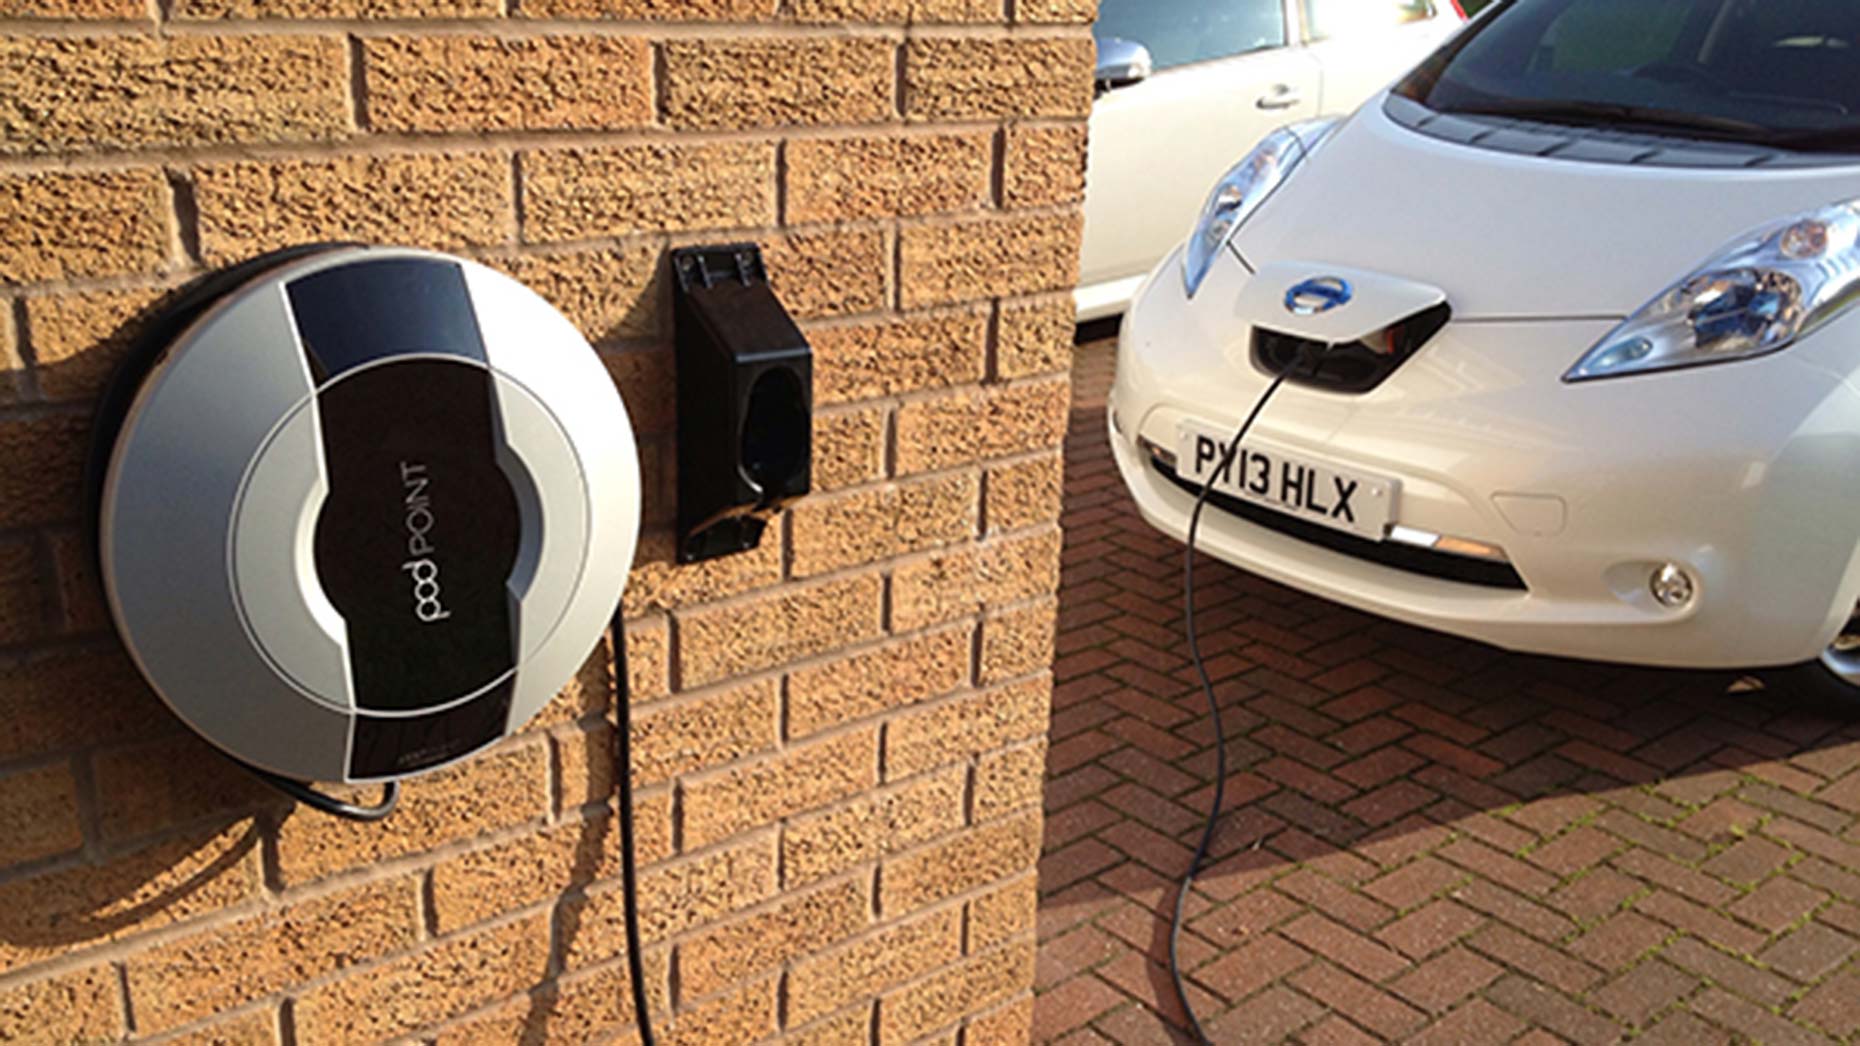 Lincolnshire firm installs electric car charging points for 1p